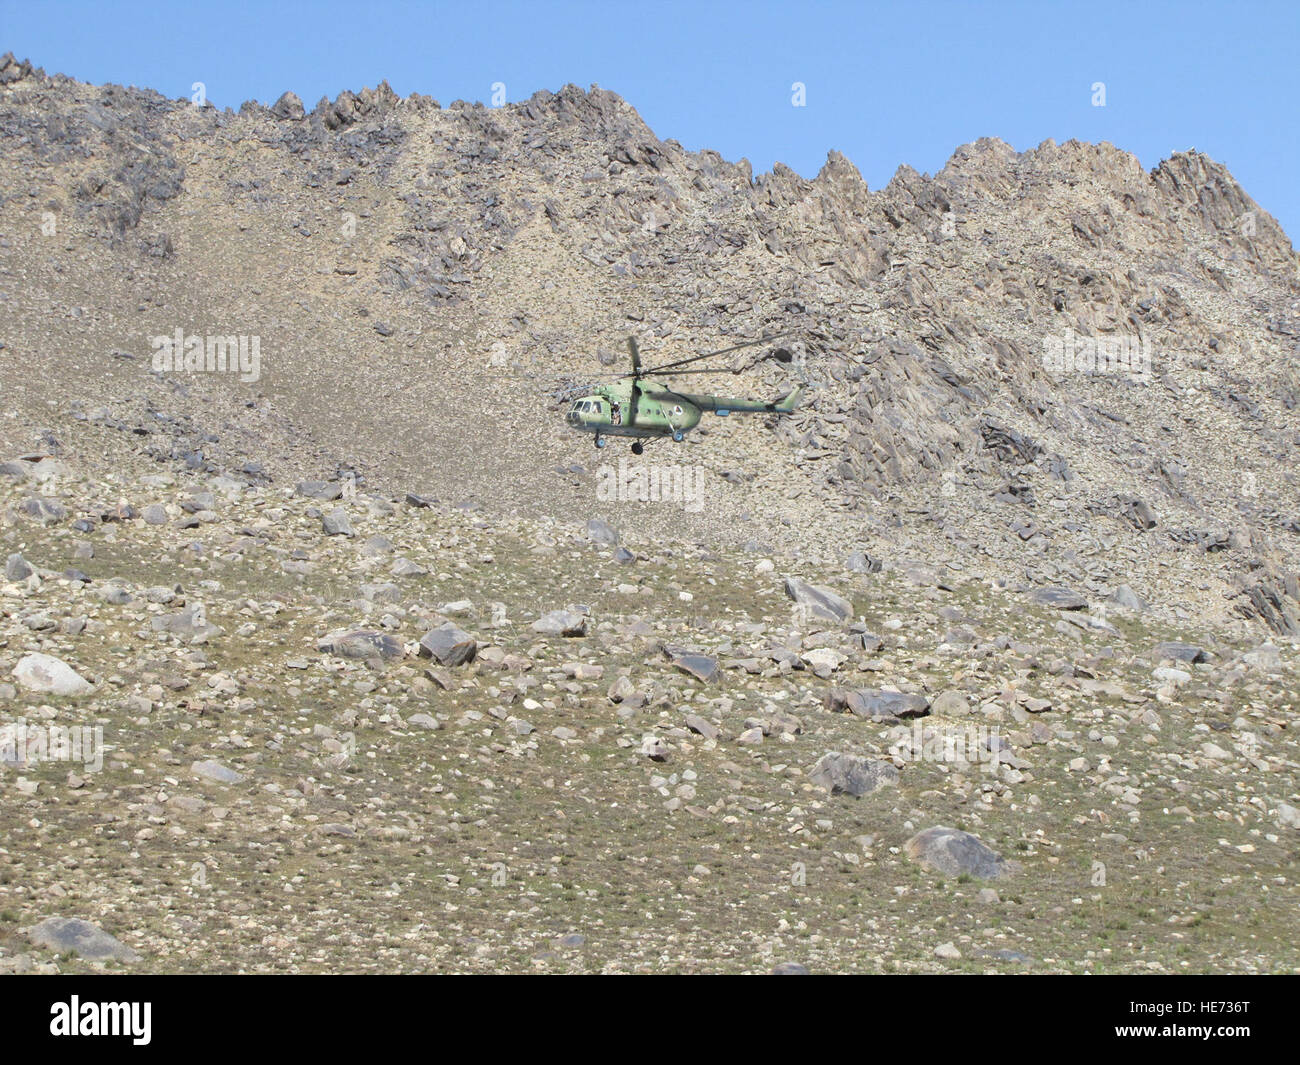 Afghan National Army Air Corps Mi-17 prepares to land in a landing zone at an elevation of 12,000 feet, May 22. This is the closest aircraft could land safely to get the needed supplies to conduct recovery efforts of the Pamir Airlines passenger jet that crashed, Monday, May 24. There were no survivors among the 38 passengers and 5 crew. Stock Photo